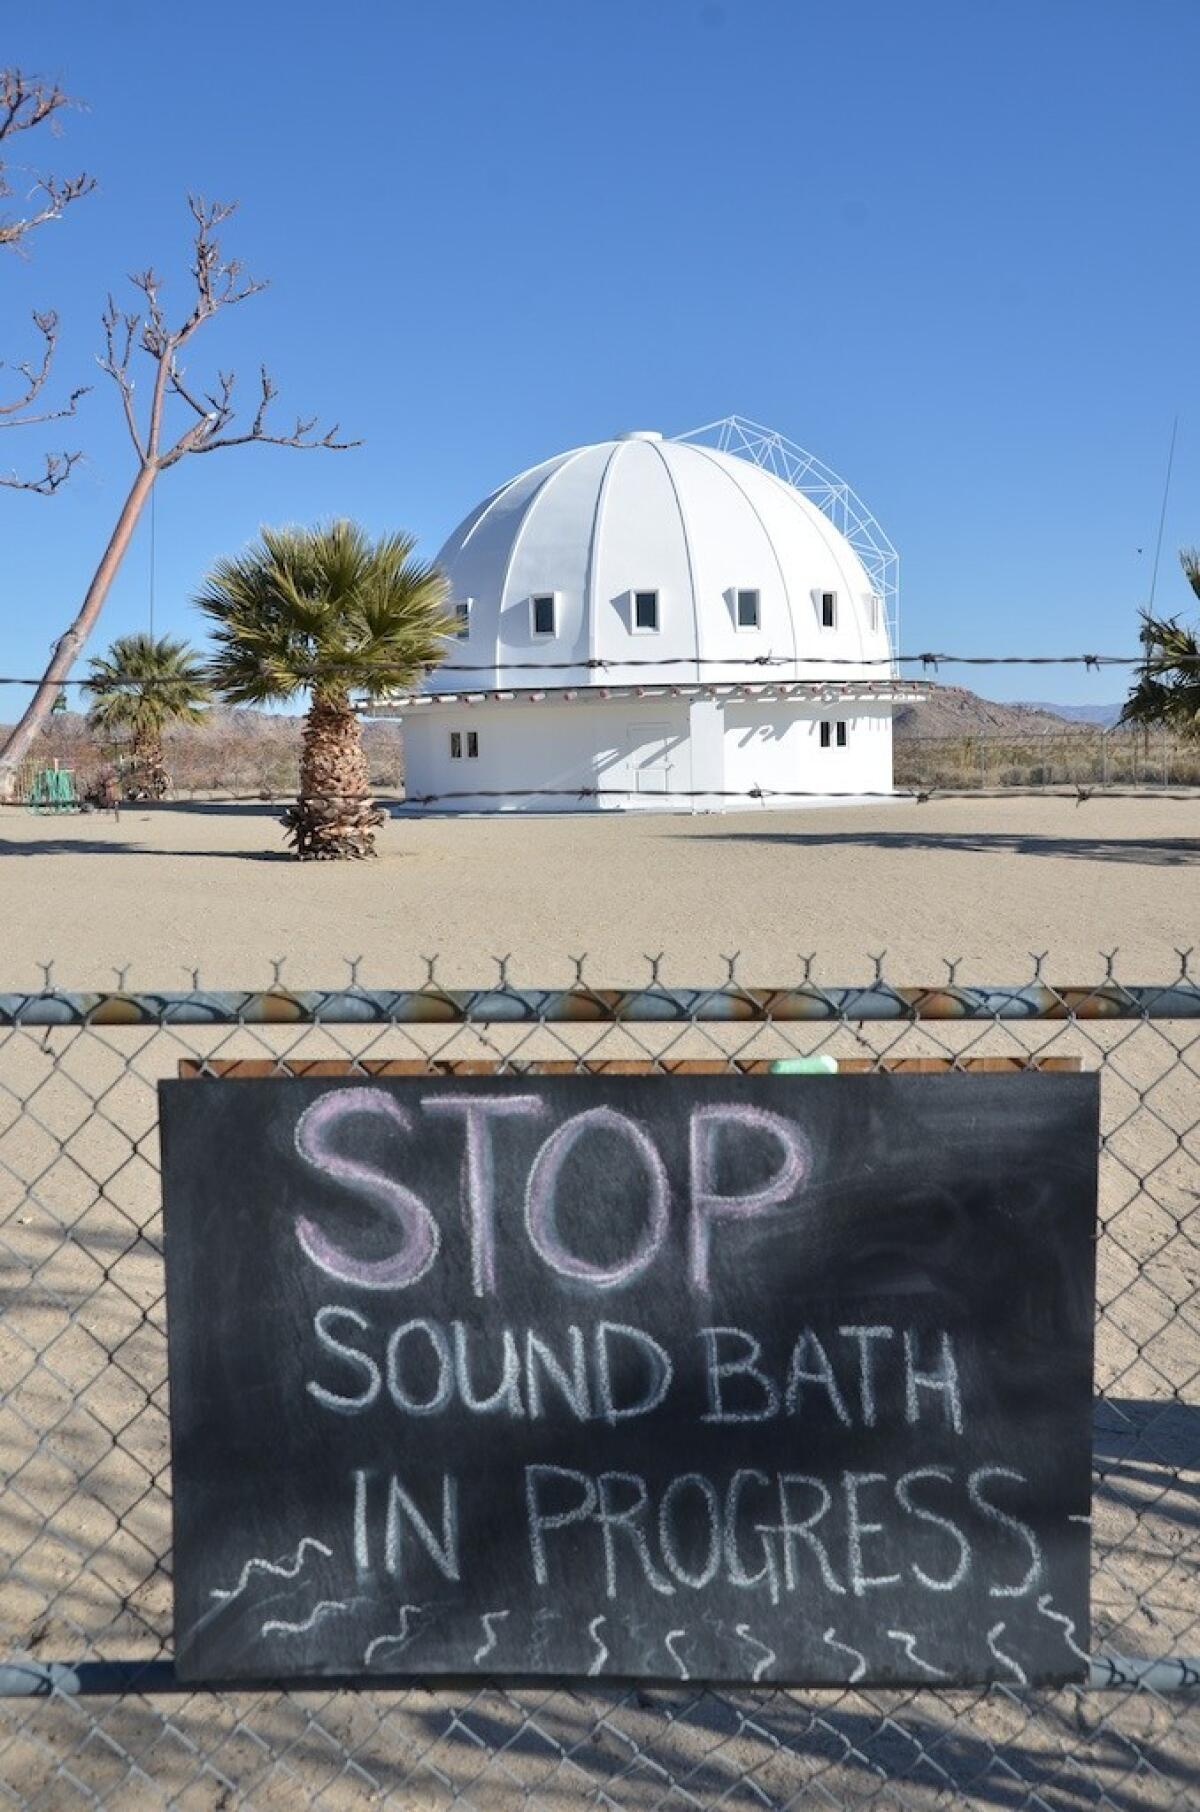 The Integratron, about 20 minutes north of Joshua Tree, is a white wooden dome, 38 feet high.